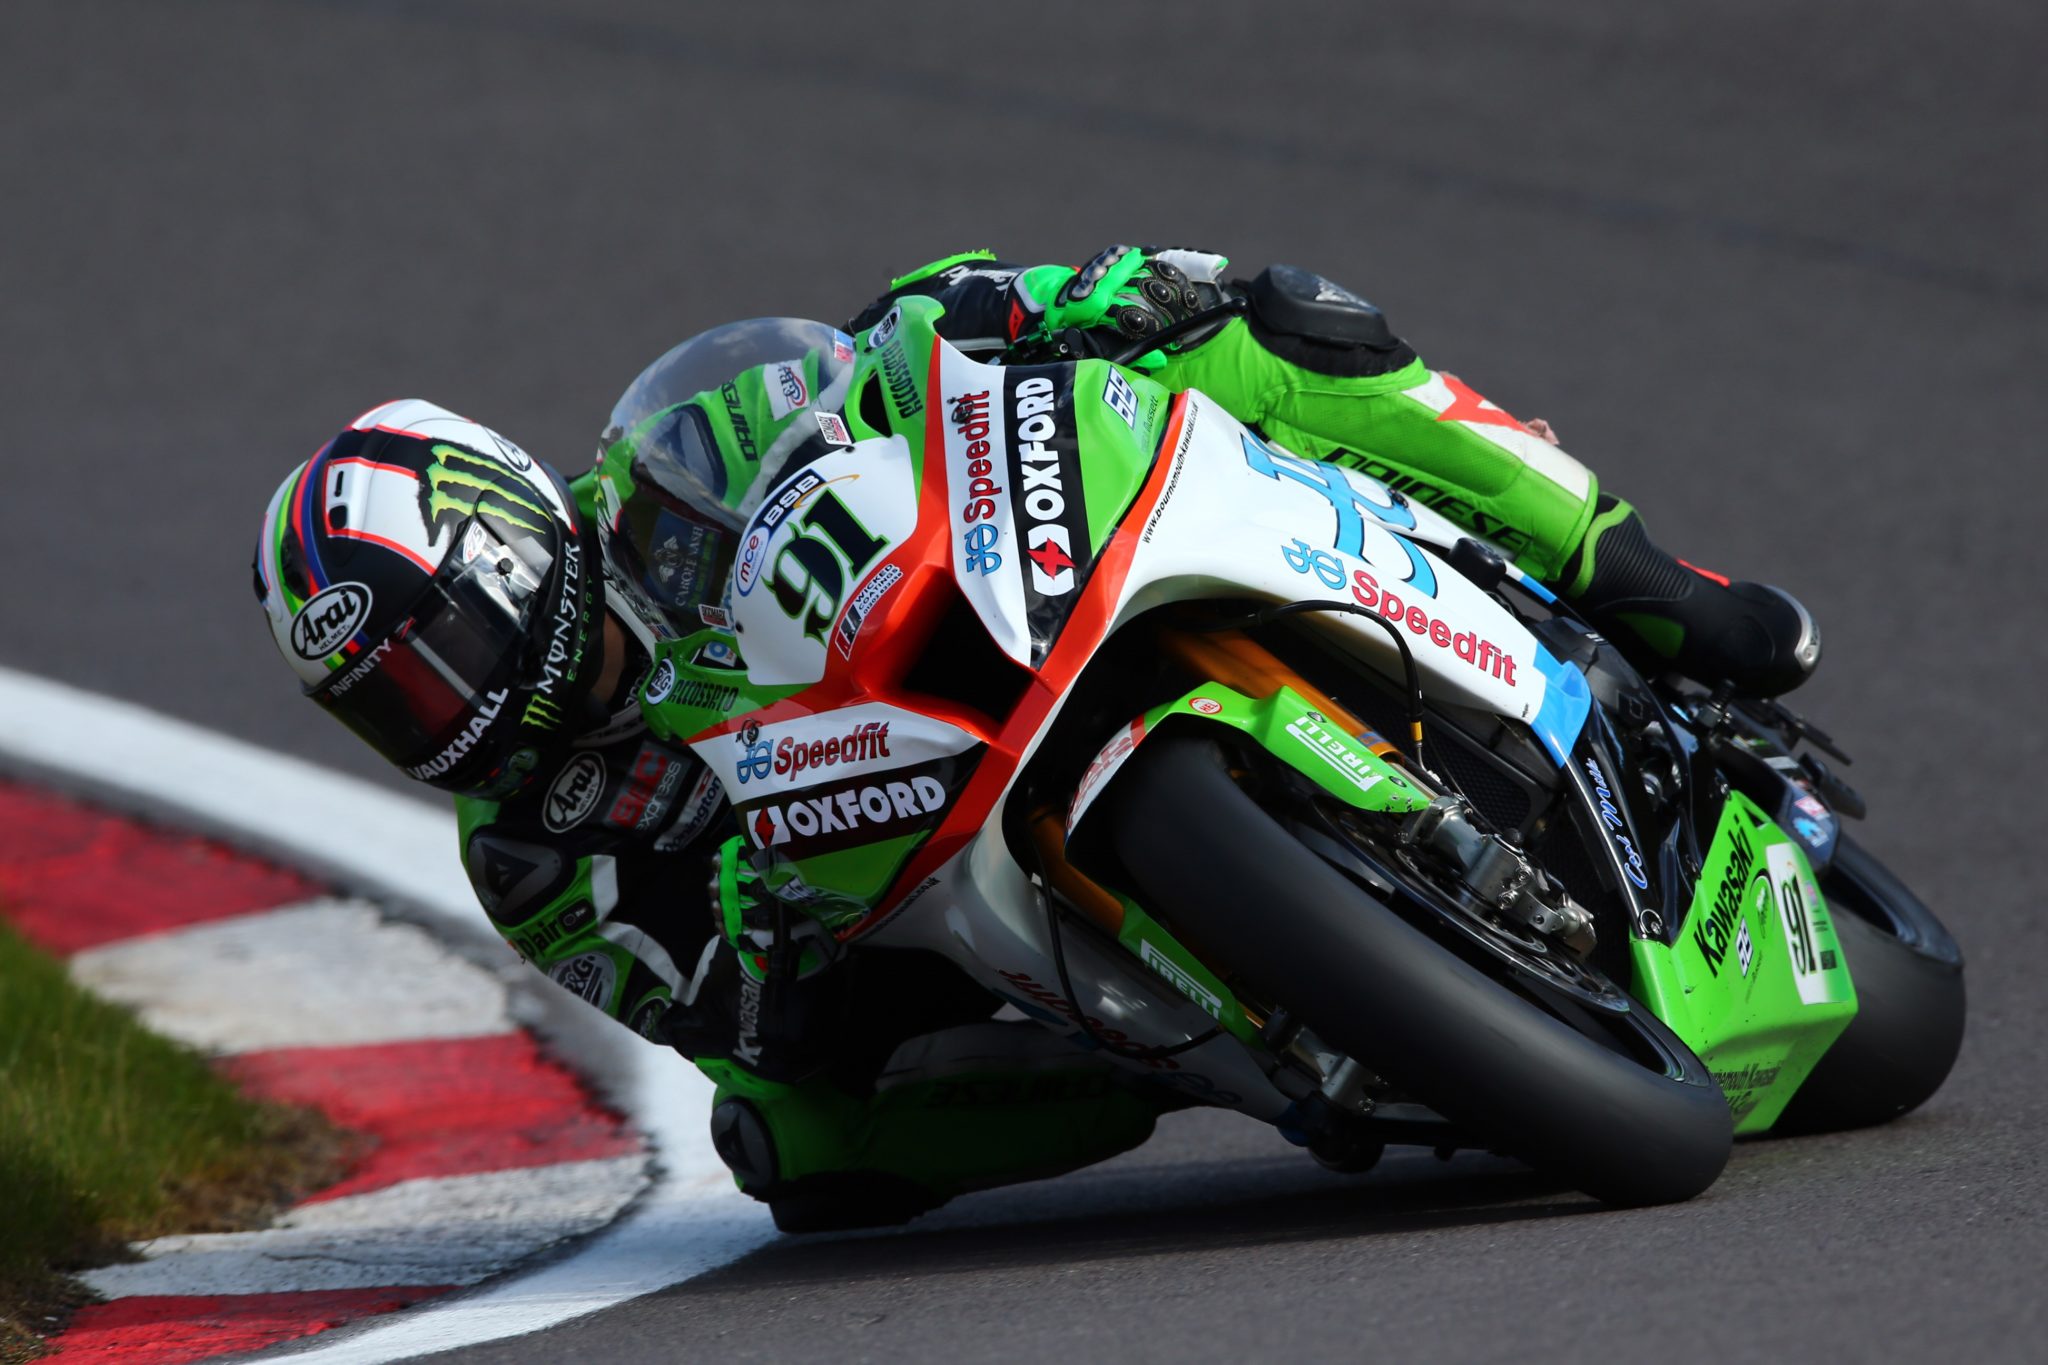 Haslam takes the lead but can he win? Image credit Tim Keeton (Impact Images Photography)